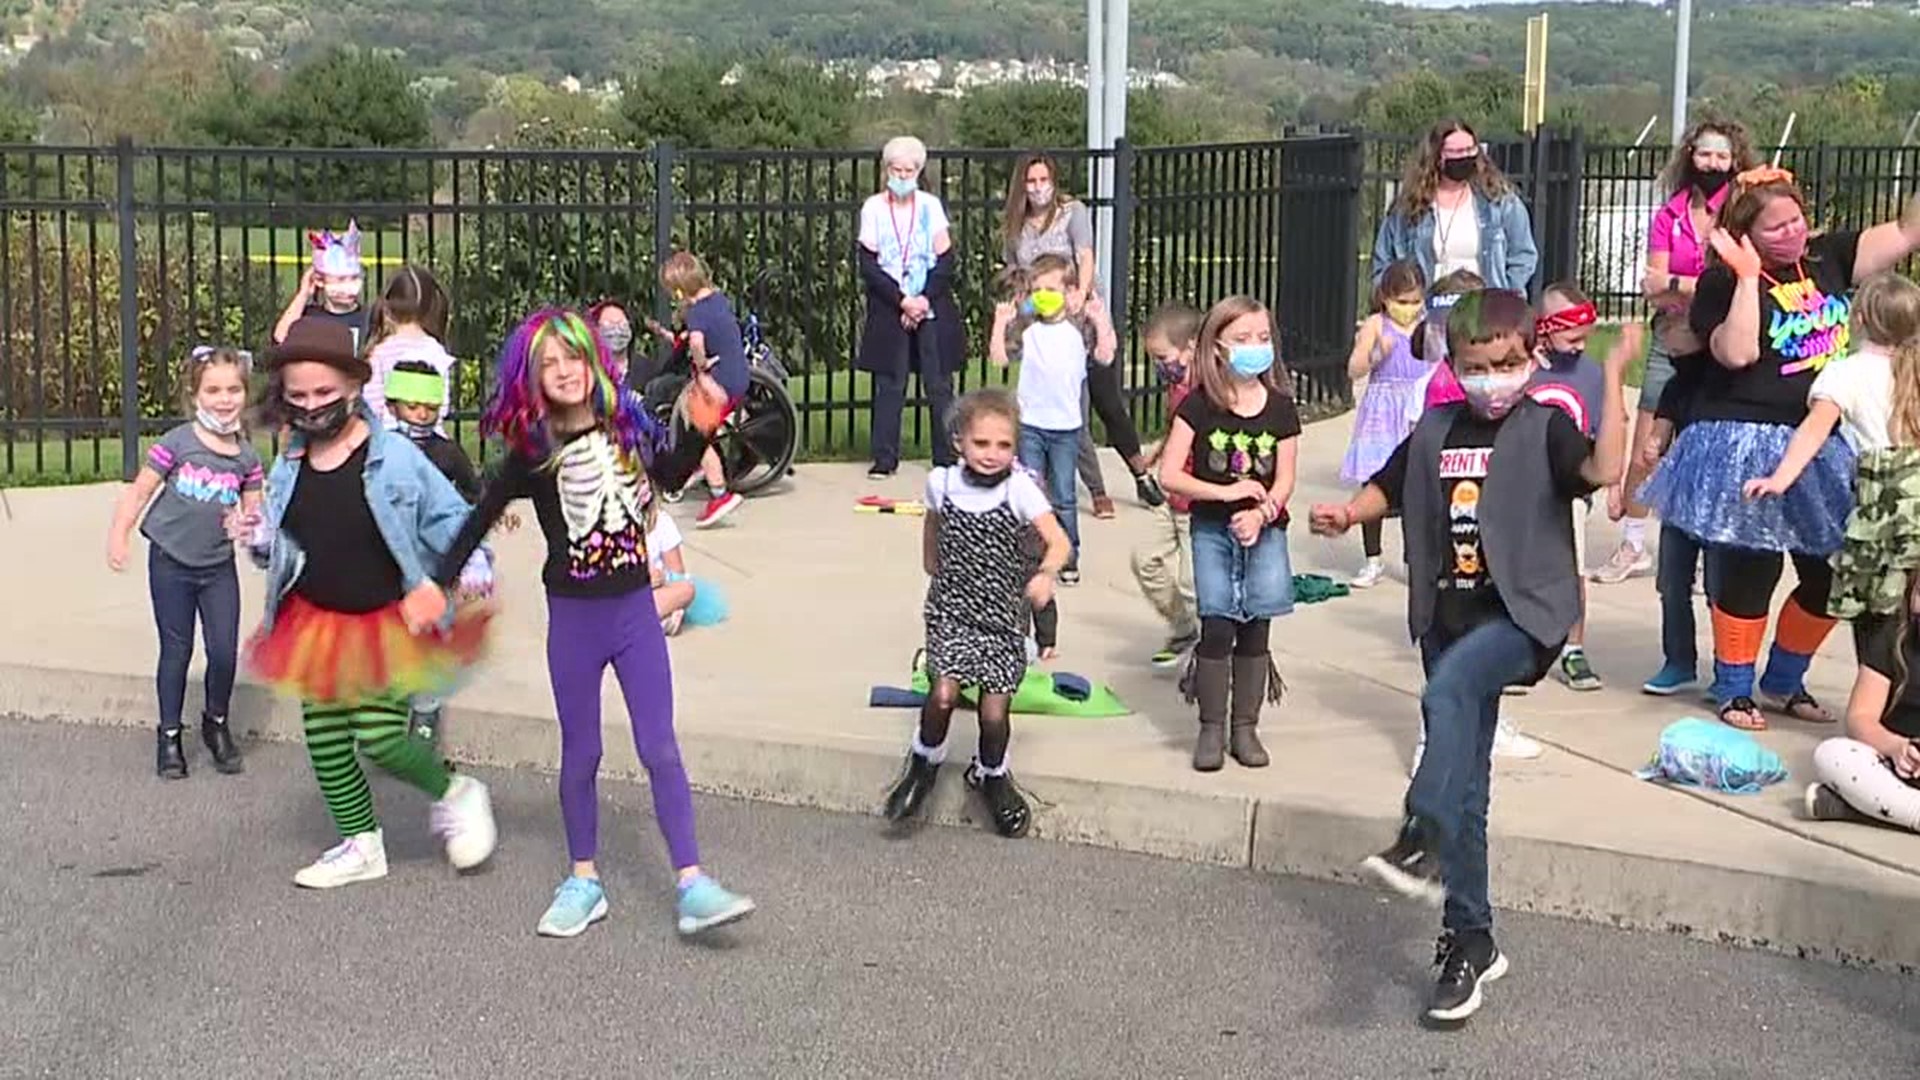 Students in Danville are "rocking" their educations, as teachers and students transformed into rock stars on Thursday.